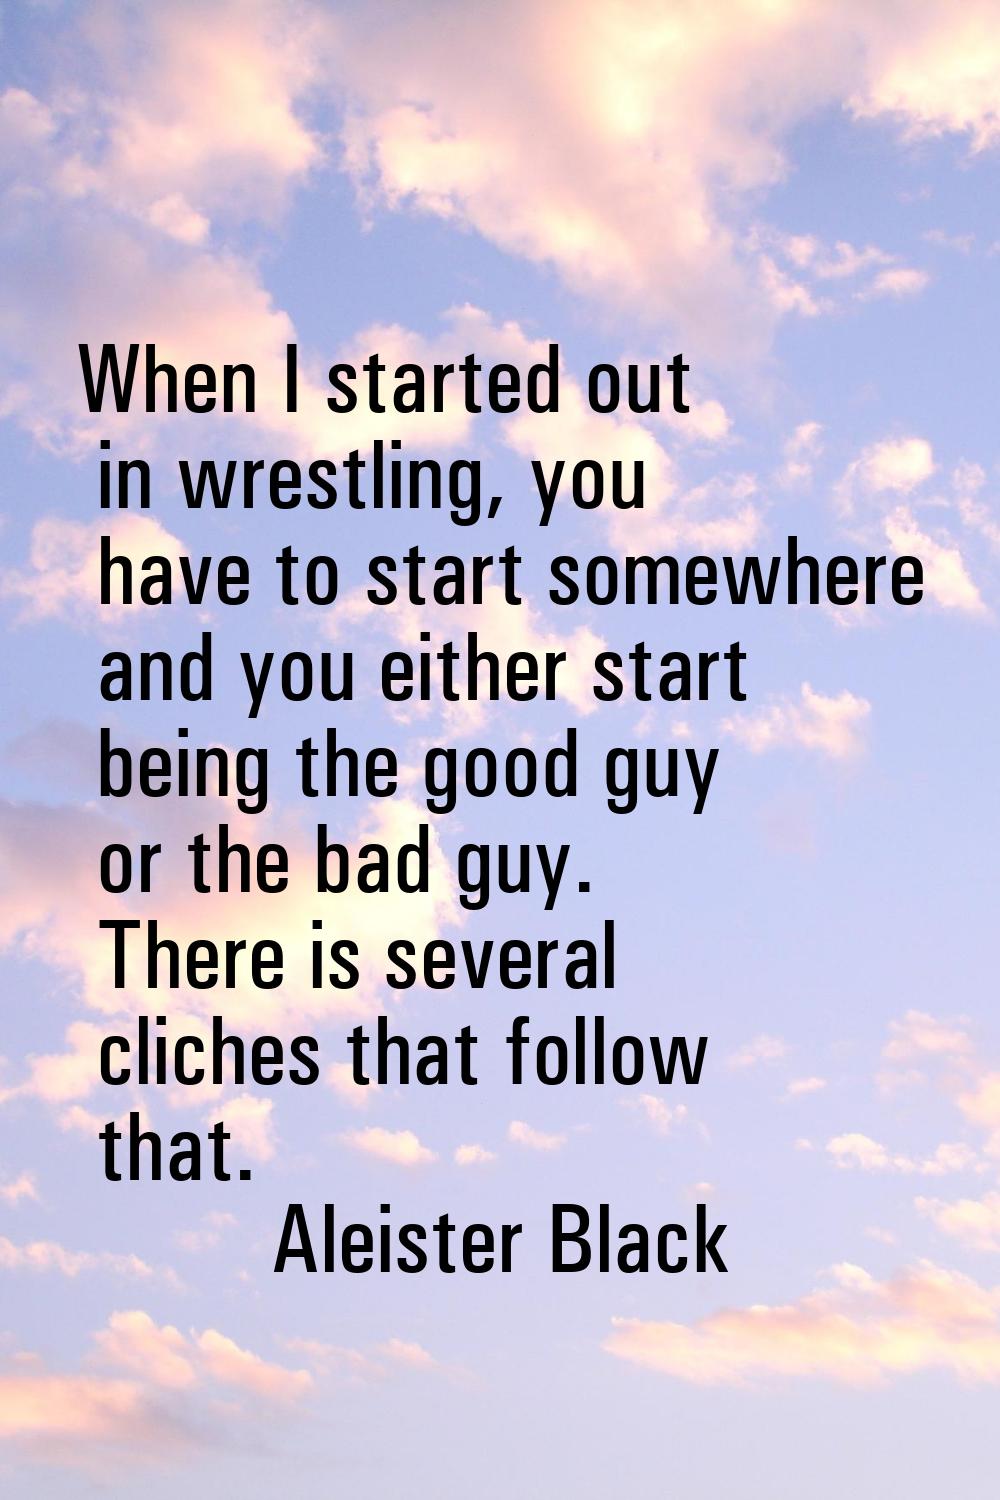 When I started out in wrestling, you have to start somewhere and you either start being the good gu